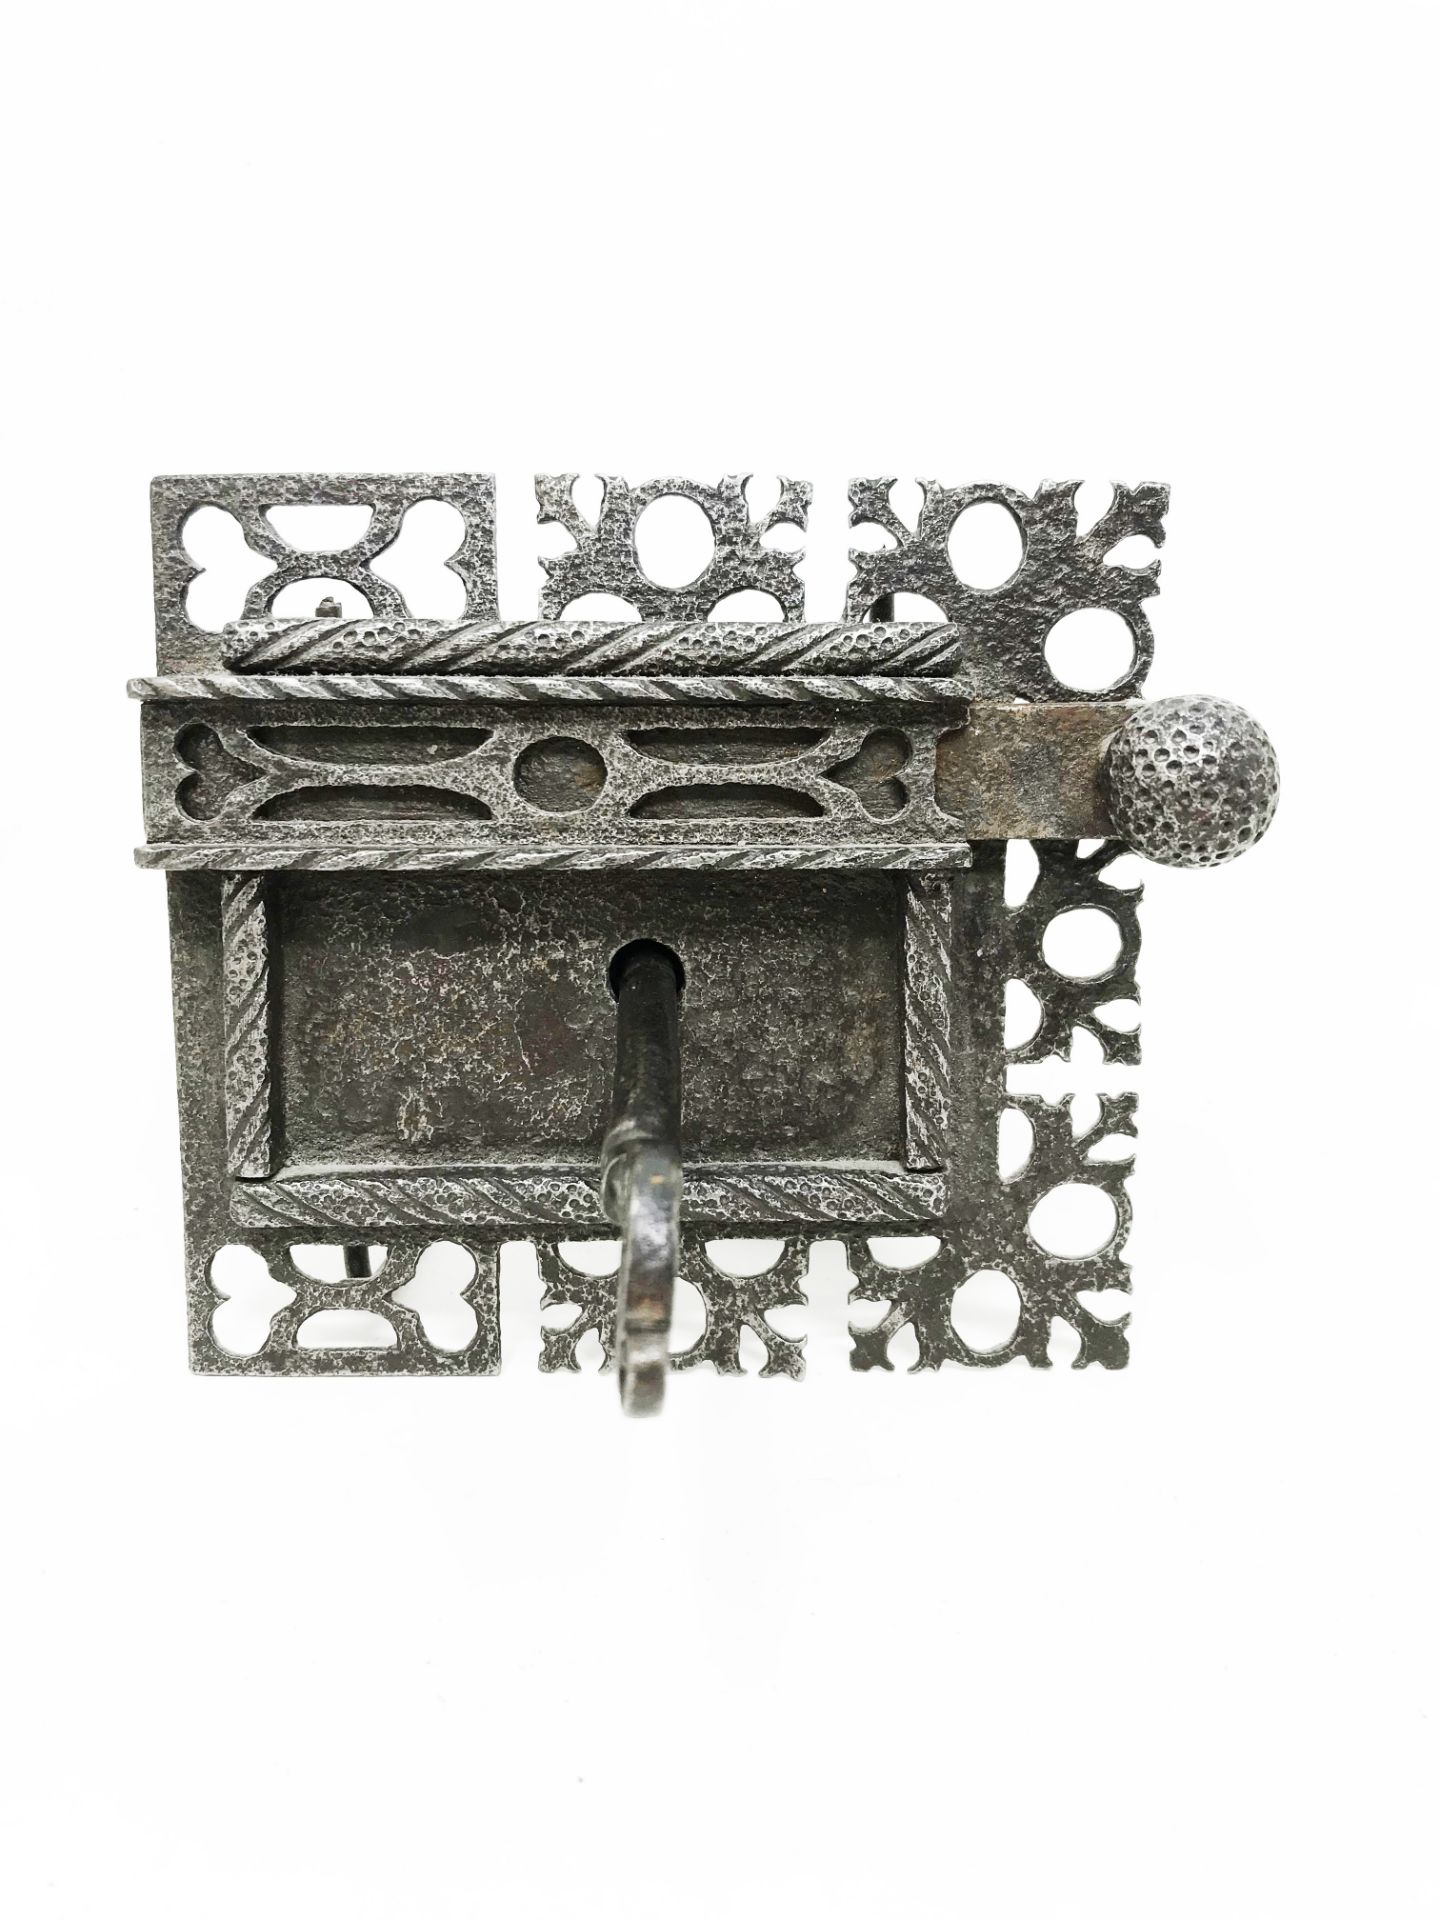 Credenza lock and its so-called Venetian key, lock plate pierced with hearts, twisted frame, bolt